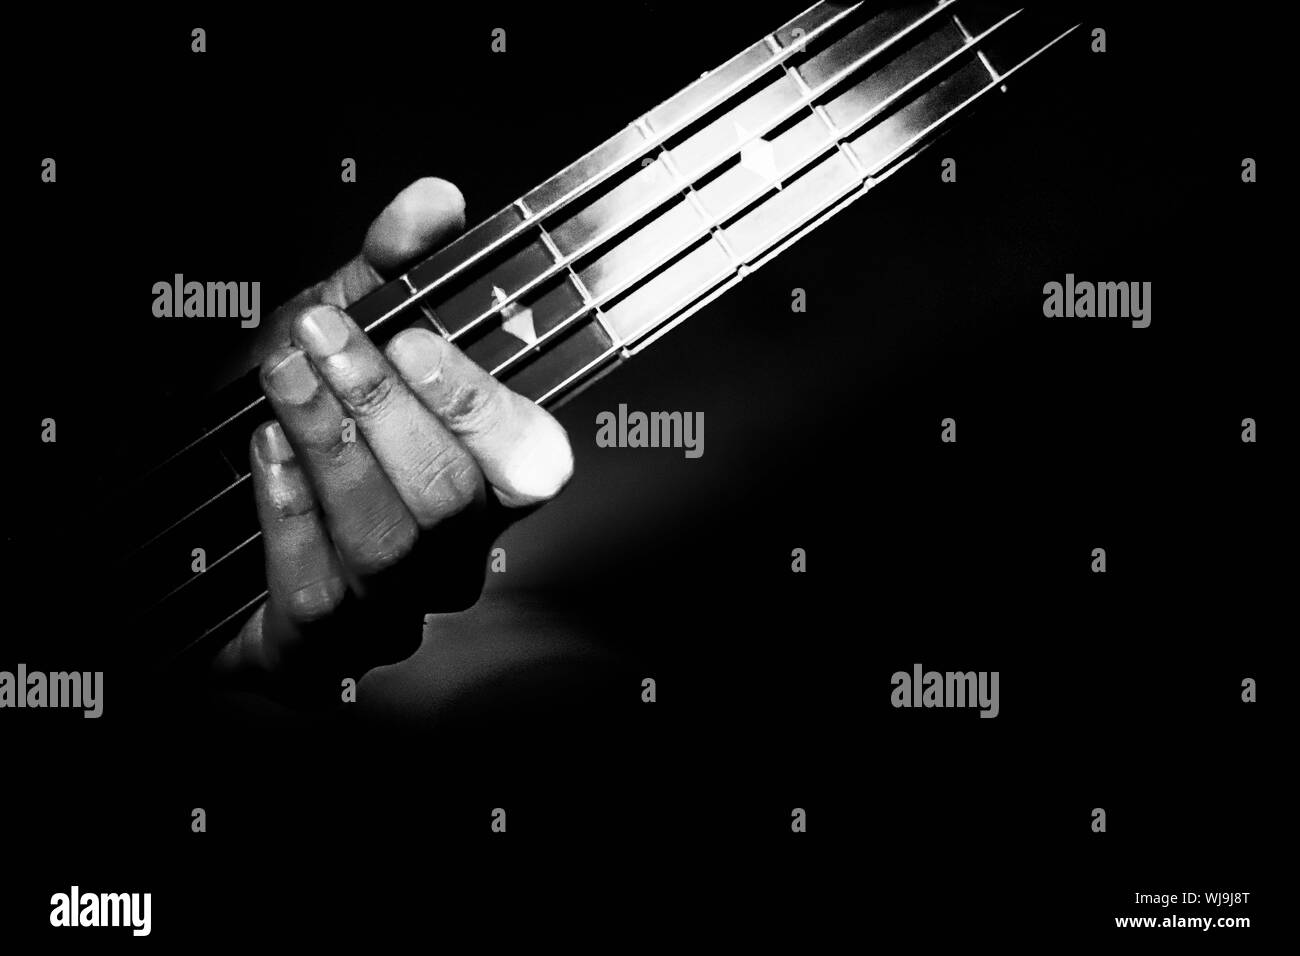 Instrument bass Black and White Stock Photos & Images - Alamy